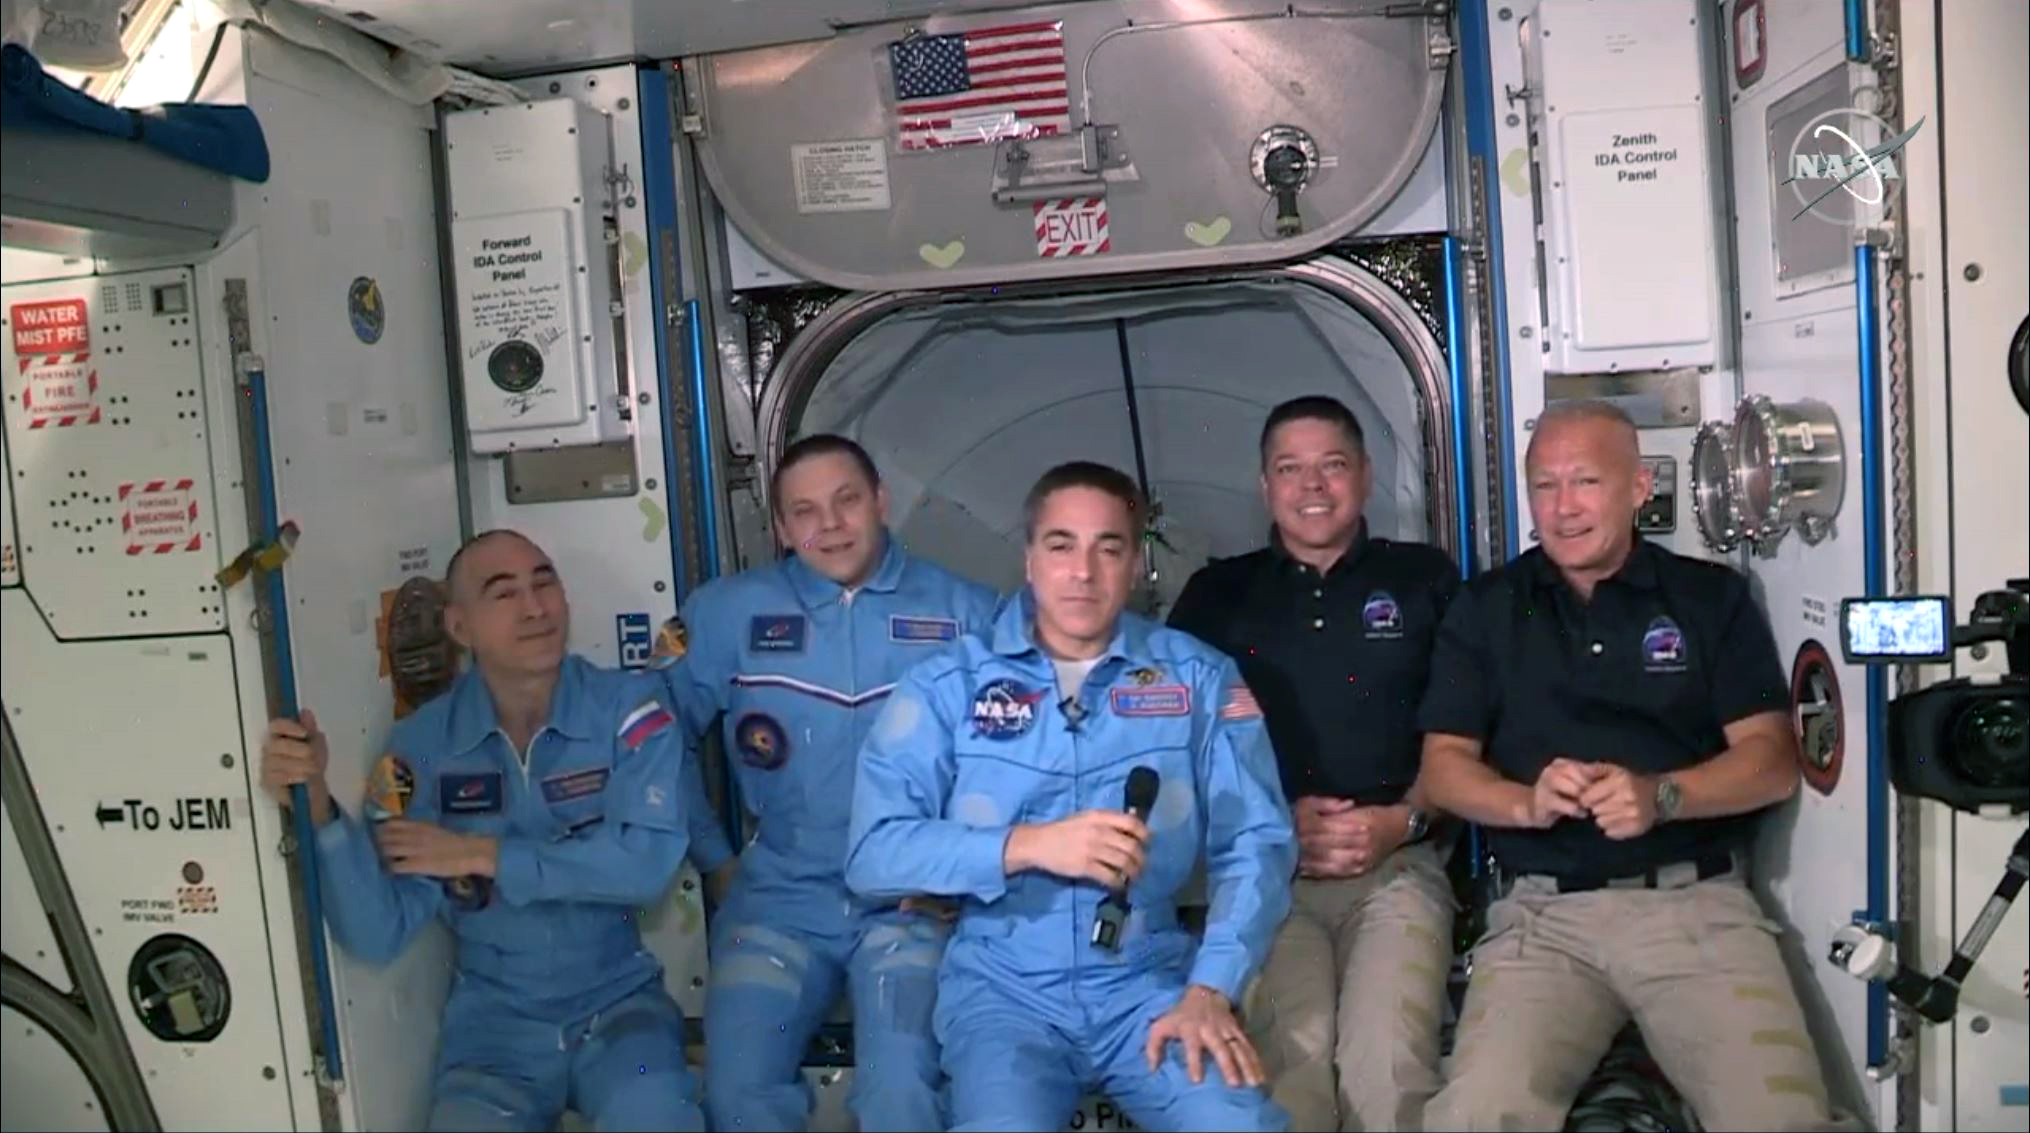 INTERNATIONAL SPACE STATION - MAY 31: In this screen grab from NASA's feed, NASA astronauts Doug Hurley (R) and Bob Behnken (2R) join NASA astronaut Chris Cassidy (C) and Russian cosmonauts, Anatoly Ivanishin (L) and Ivan Vagner (2L) aboard the International Space Station after successfully docking SpaceX's Dragon capsule May 31, 2020. The docking occurred just 19 hours after a SpaceX Falcon 9 rocket blasted off Saturday afternoon from Kennedy Space Center, the nation’s first astronaut launch to orbit from home soil in nearly a decade. (Photo by NASA via Getty Images)